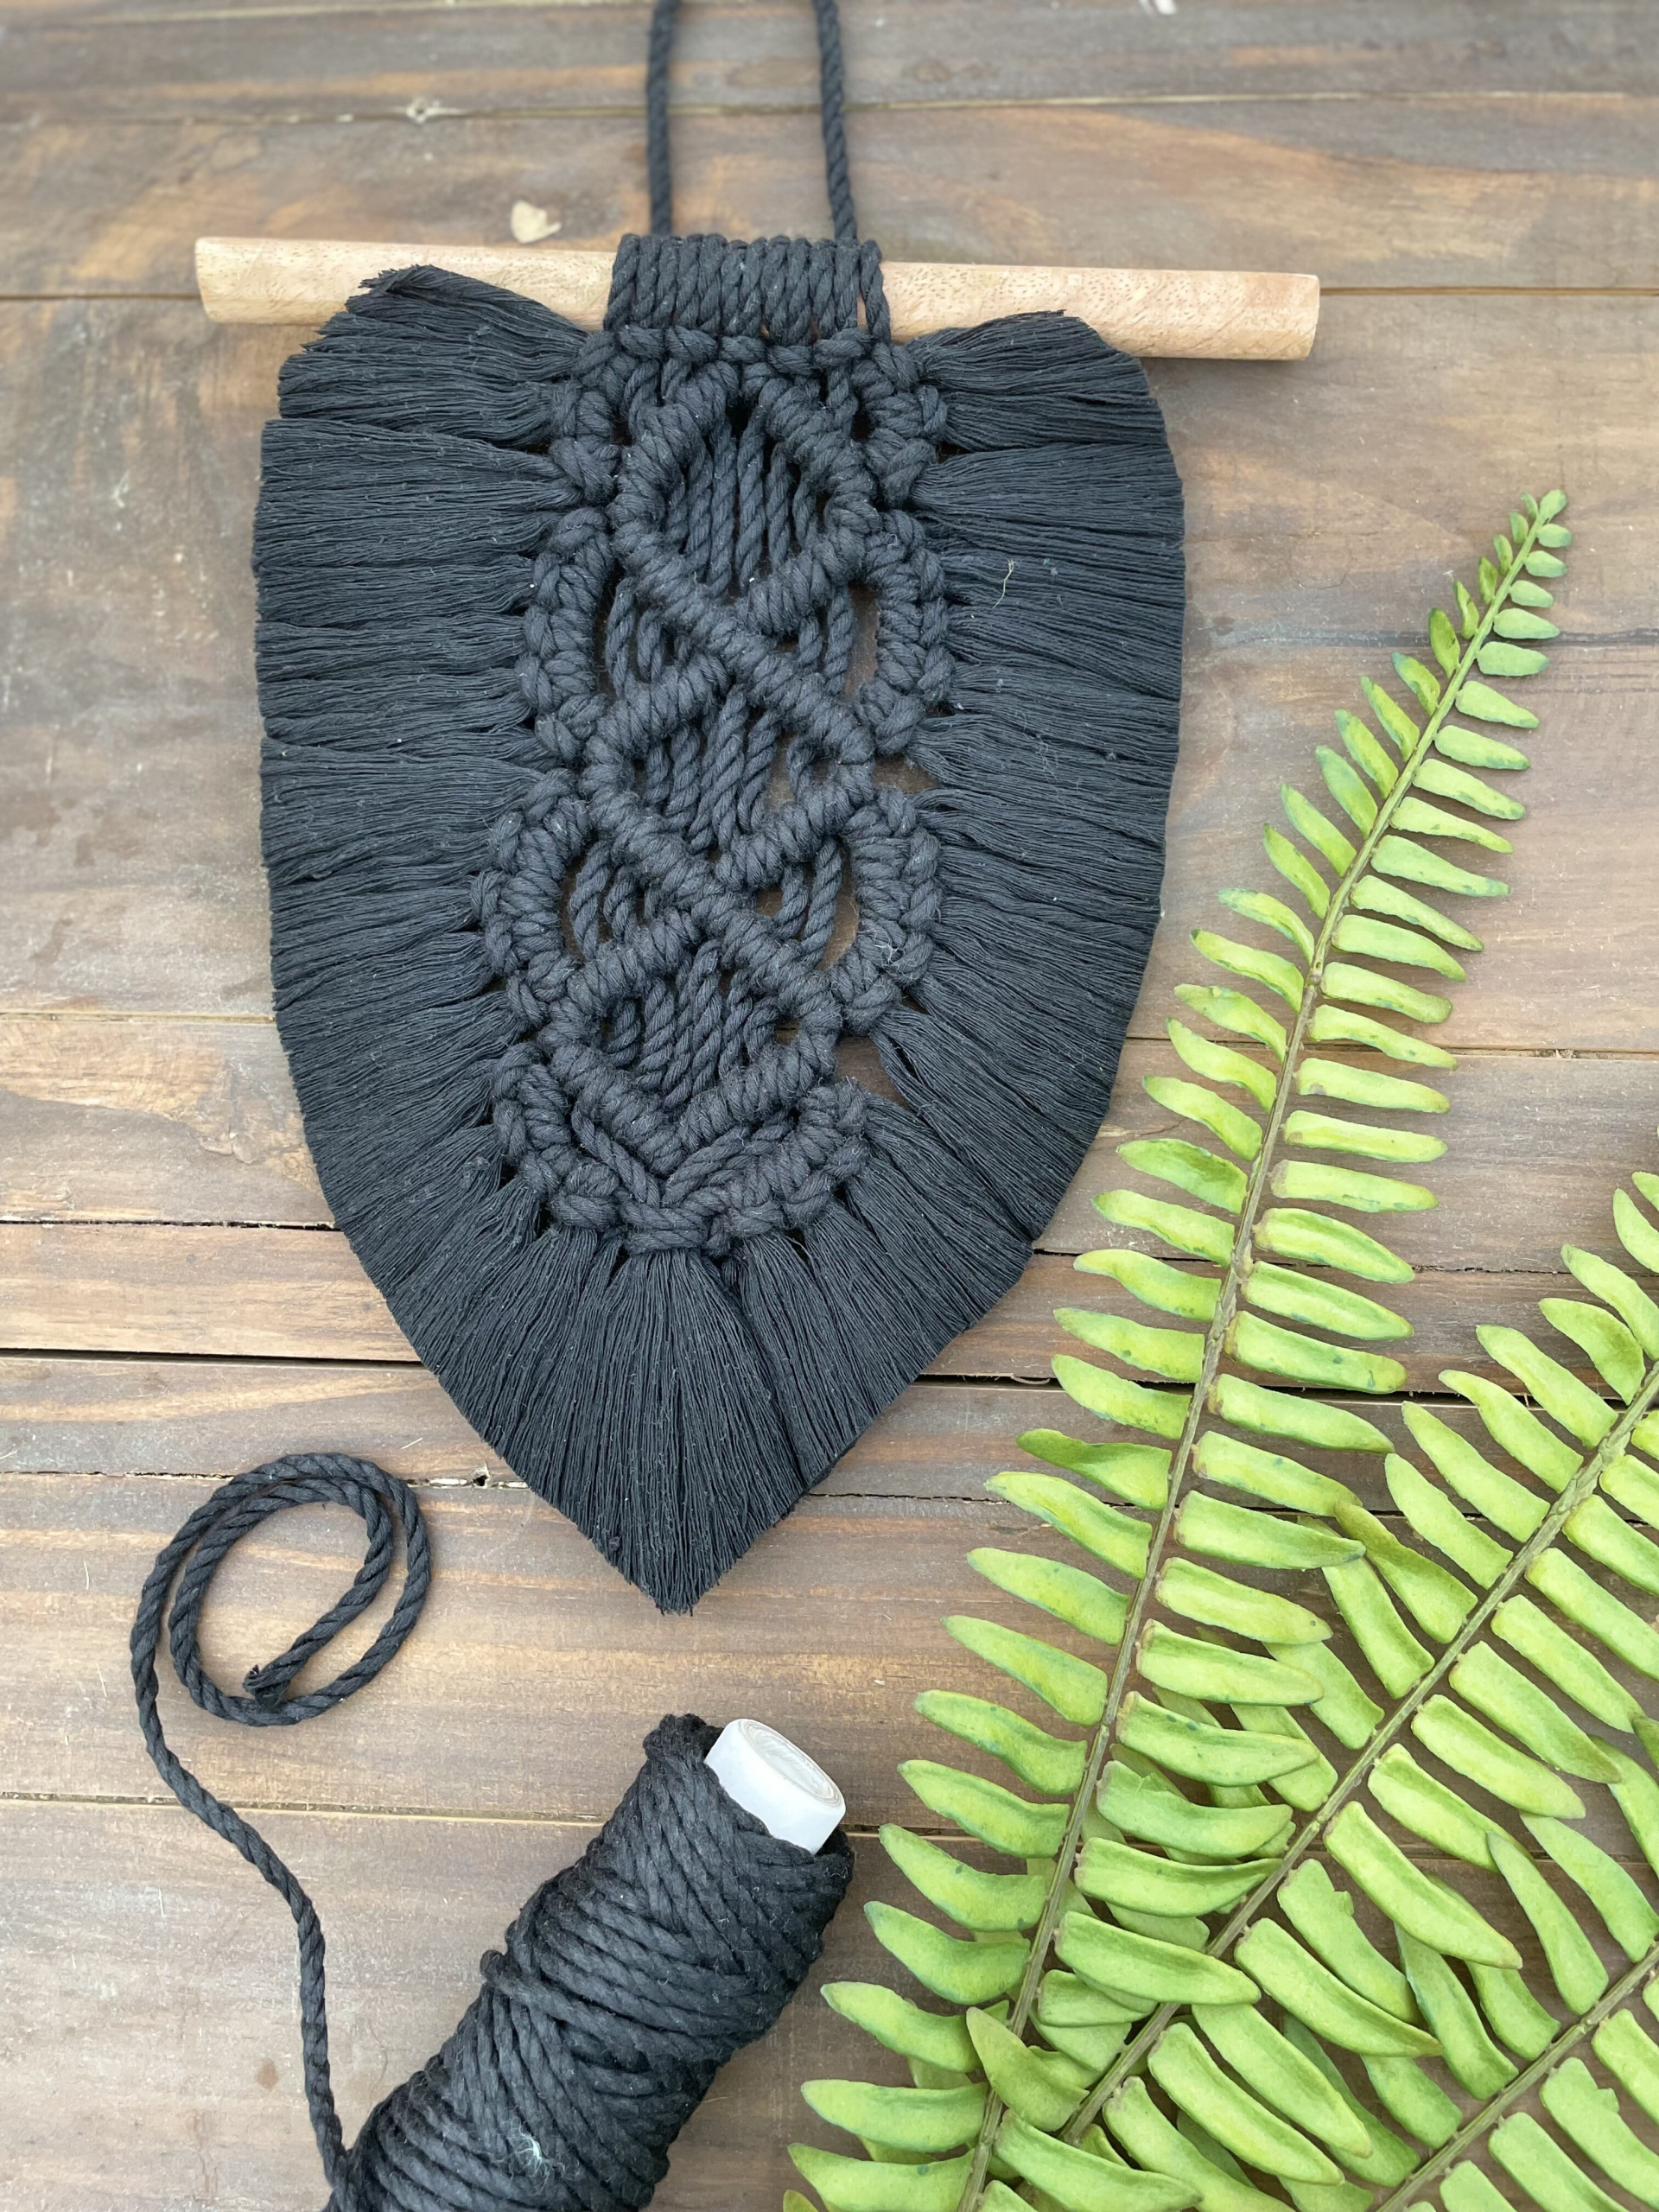 Handcrafted Knotted Natural Macramé WALL ART LEAF/FEATHER